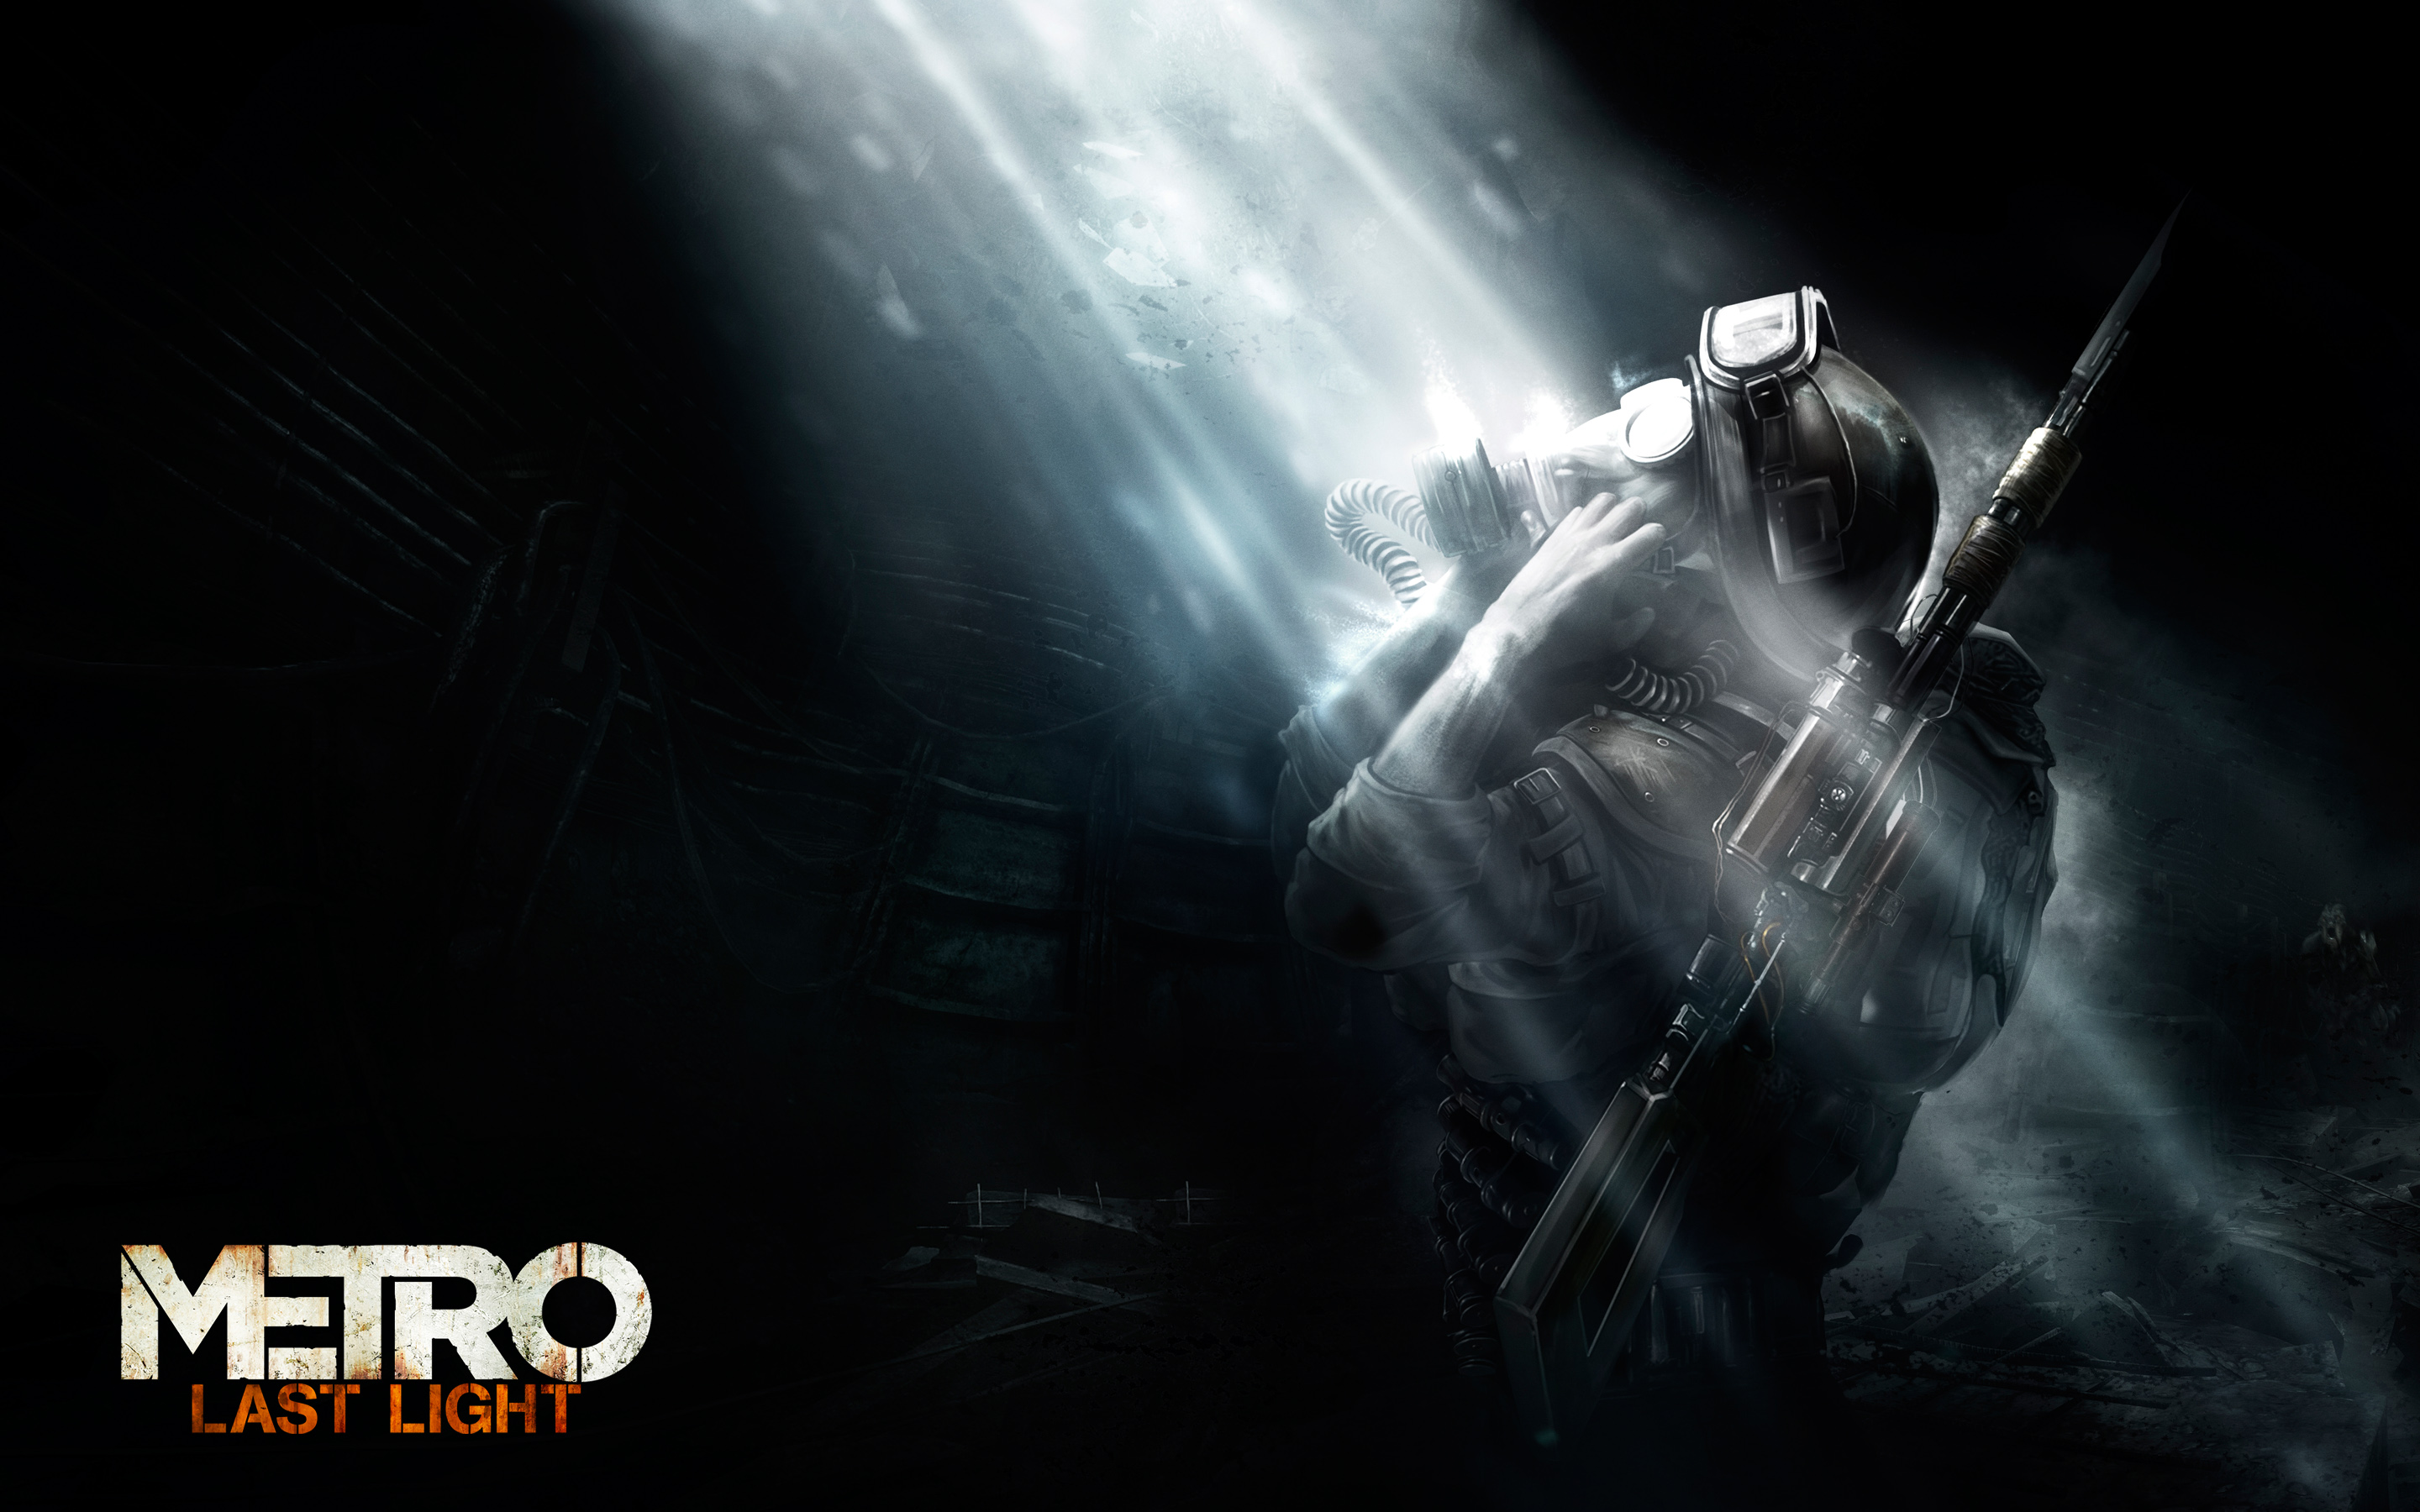 Metro Last Light 2013 Game Wallpapers HD Wallpapers 2880x1800